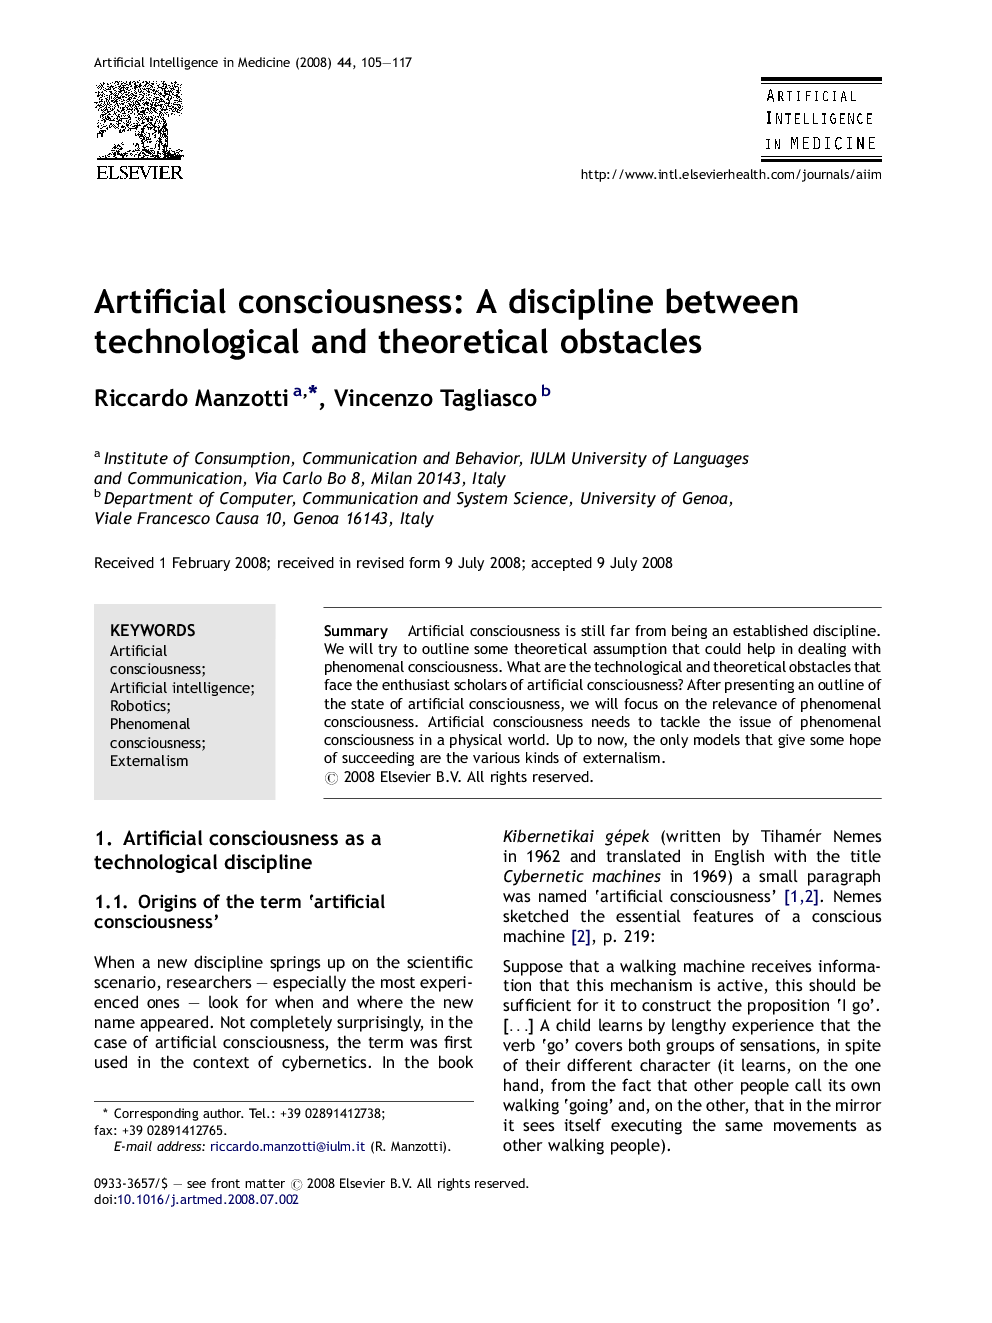 Artificial consciousness: A discipline between technological and theoretical obstacles